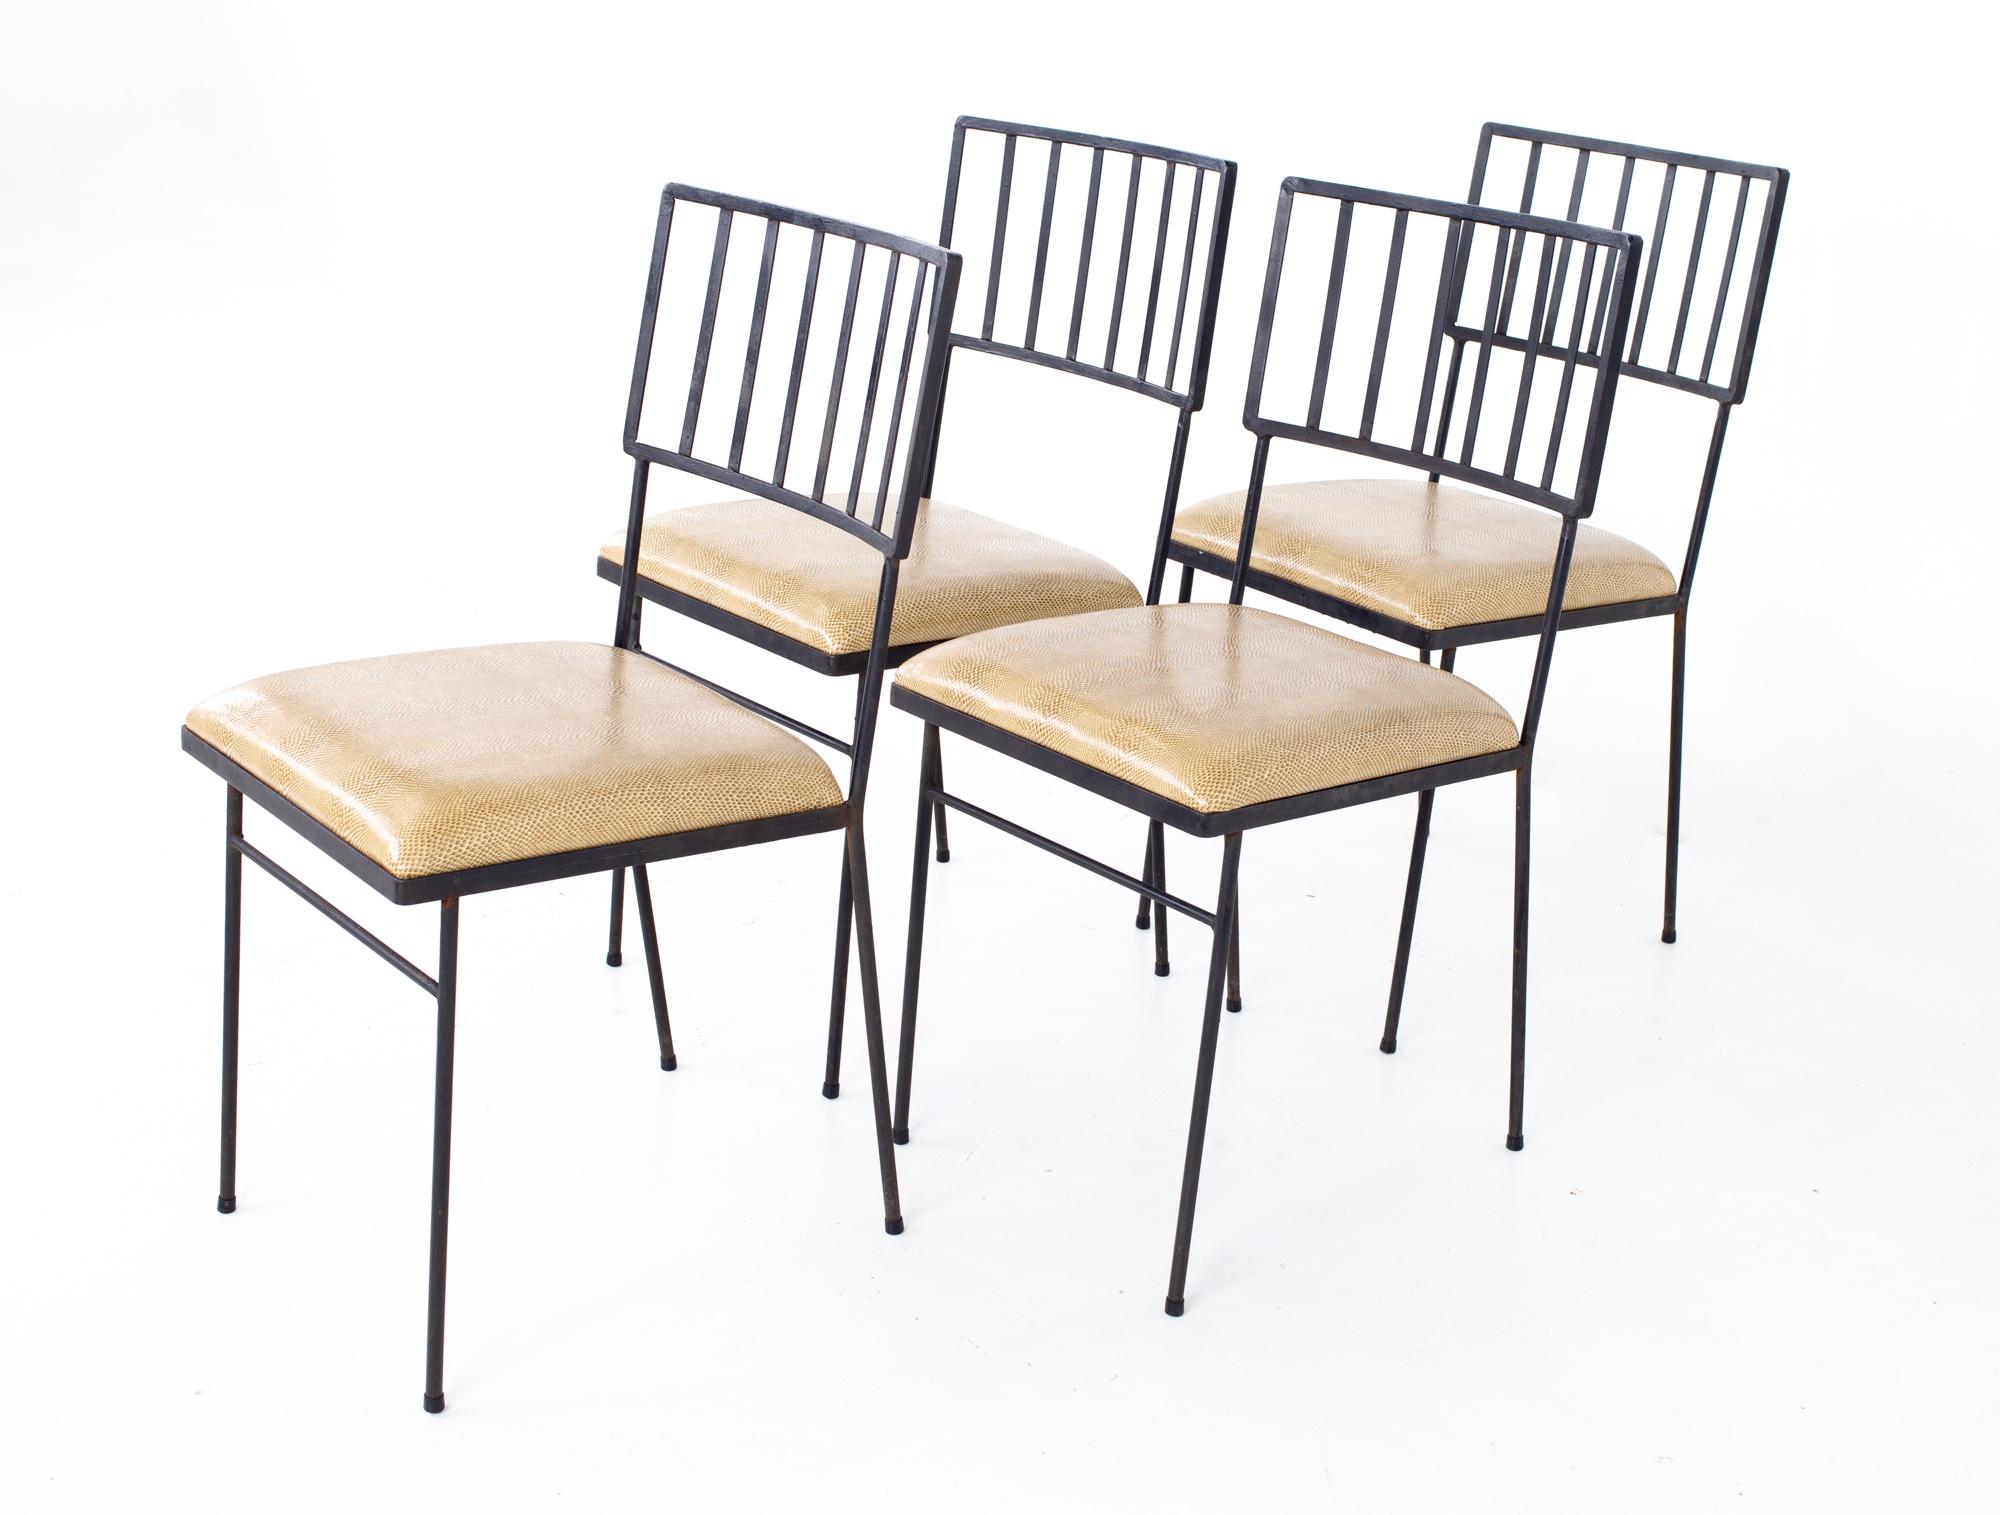 Milo Baughman for pacific iron works mid century chairs - set of 4.
Each chair measures: 15.25 wide x 19.5 deep x 32.5 high, with a seat height of 18.5 

All pieces of furniture can be had in what we call restored vintage condition. That means